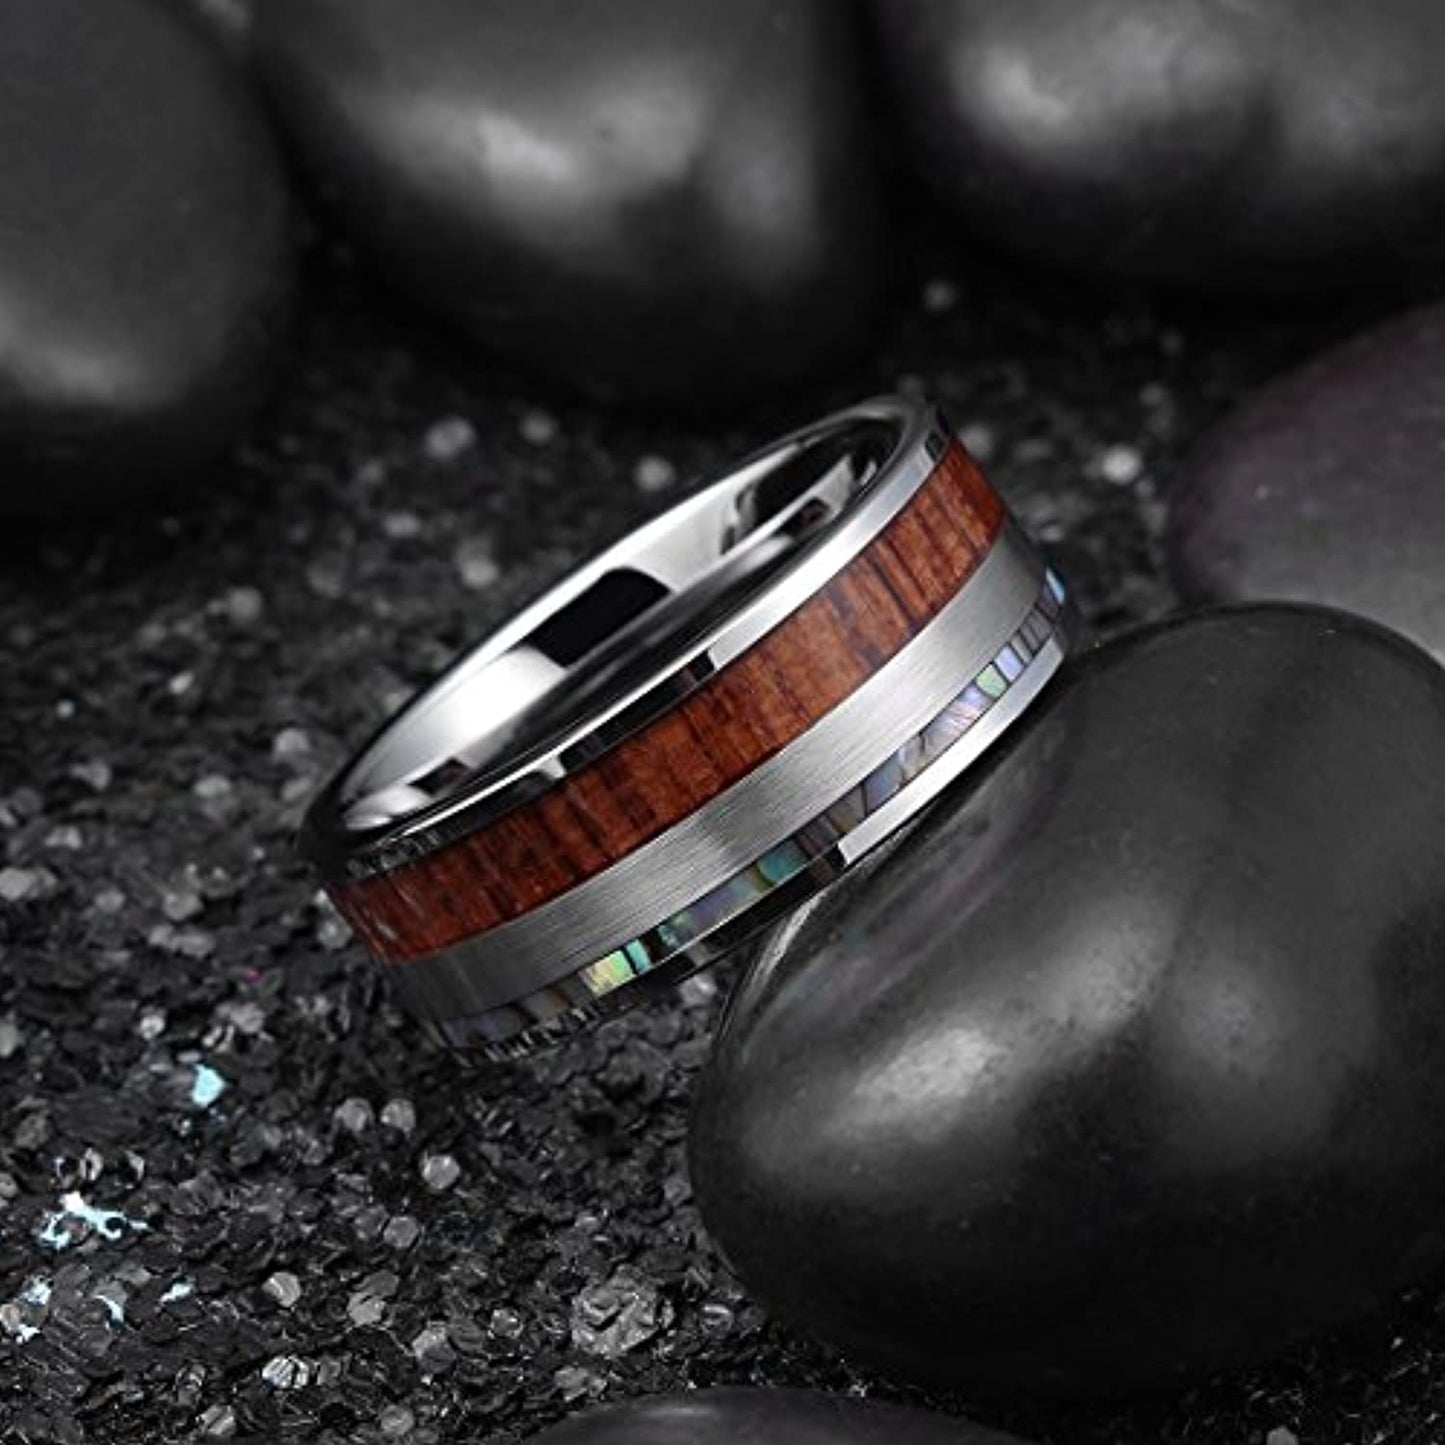 Silver Brushed and Polished Squared Tungsten Carbide Ring with Koa Wood and Opal Inlay | 8mm